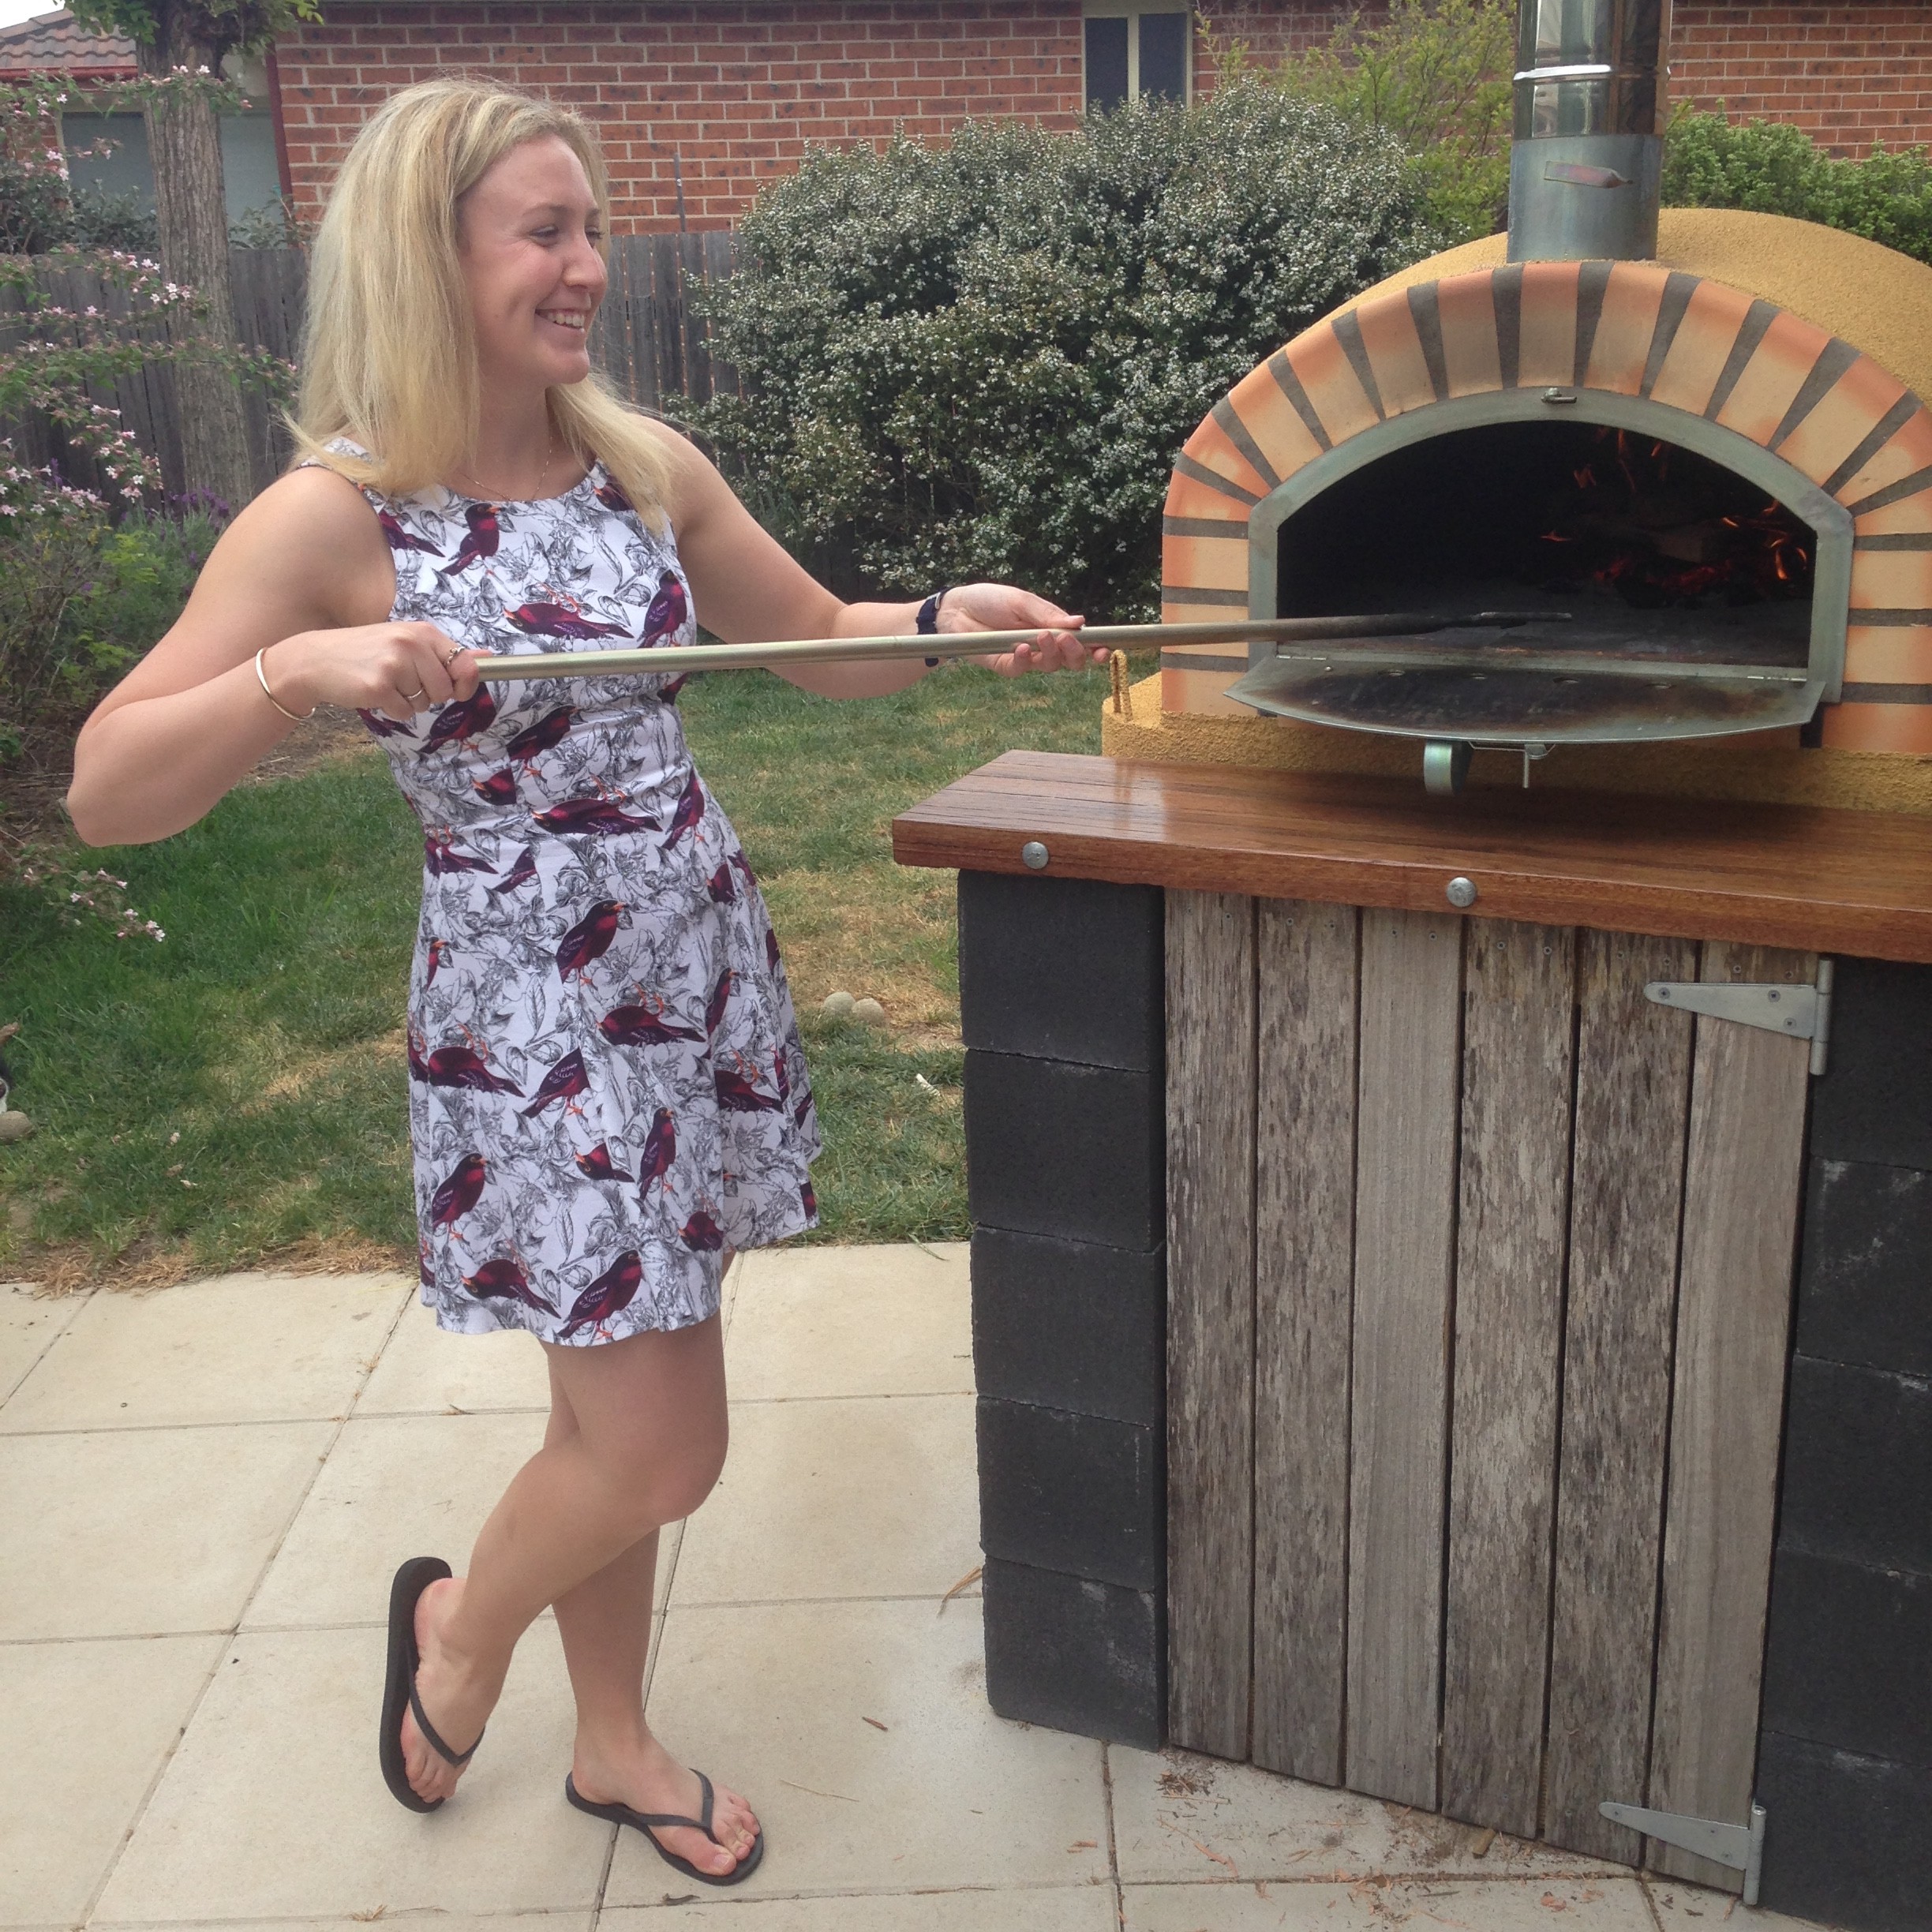 Hannah Scott working her skills at a wood-fired pizza oven